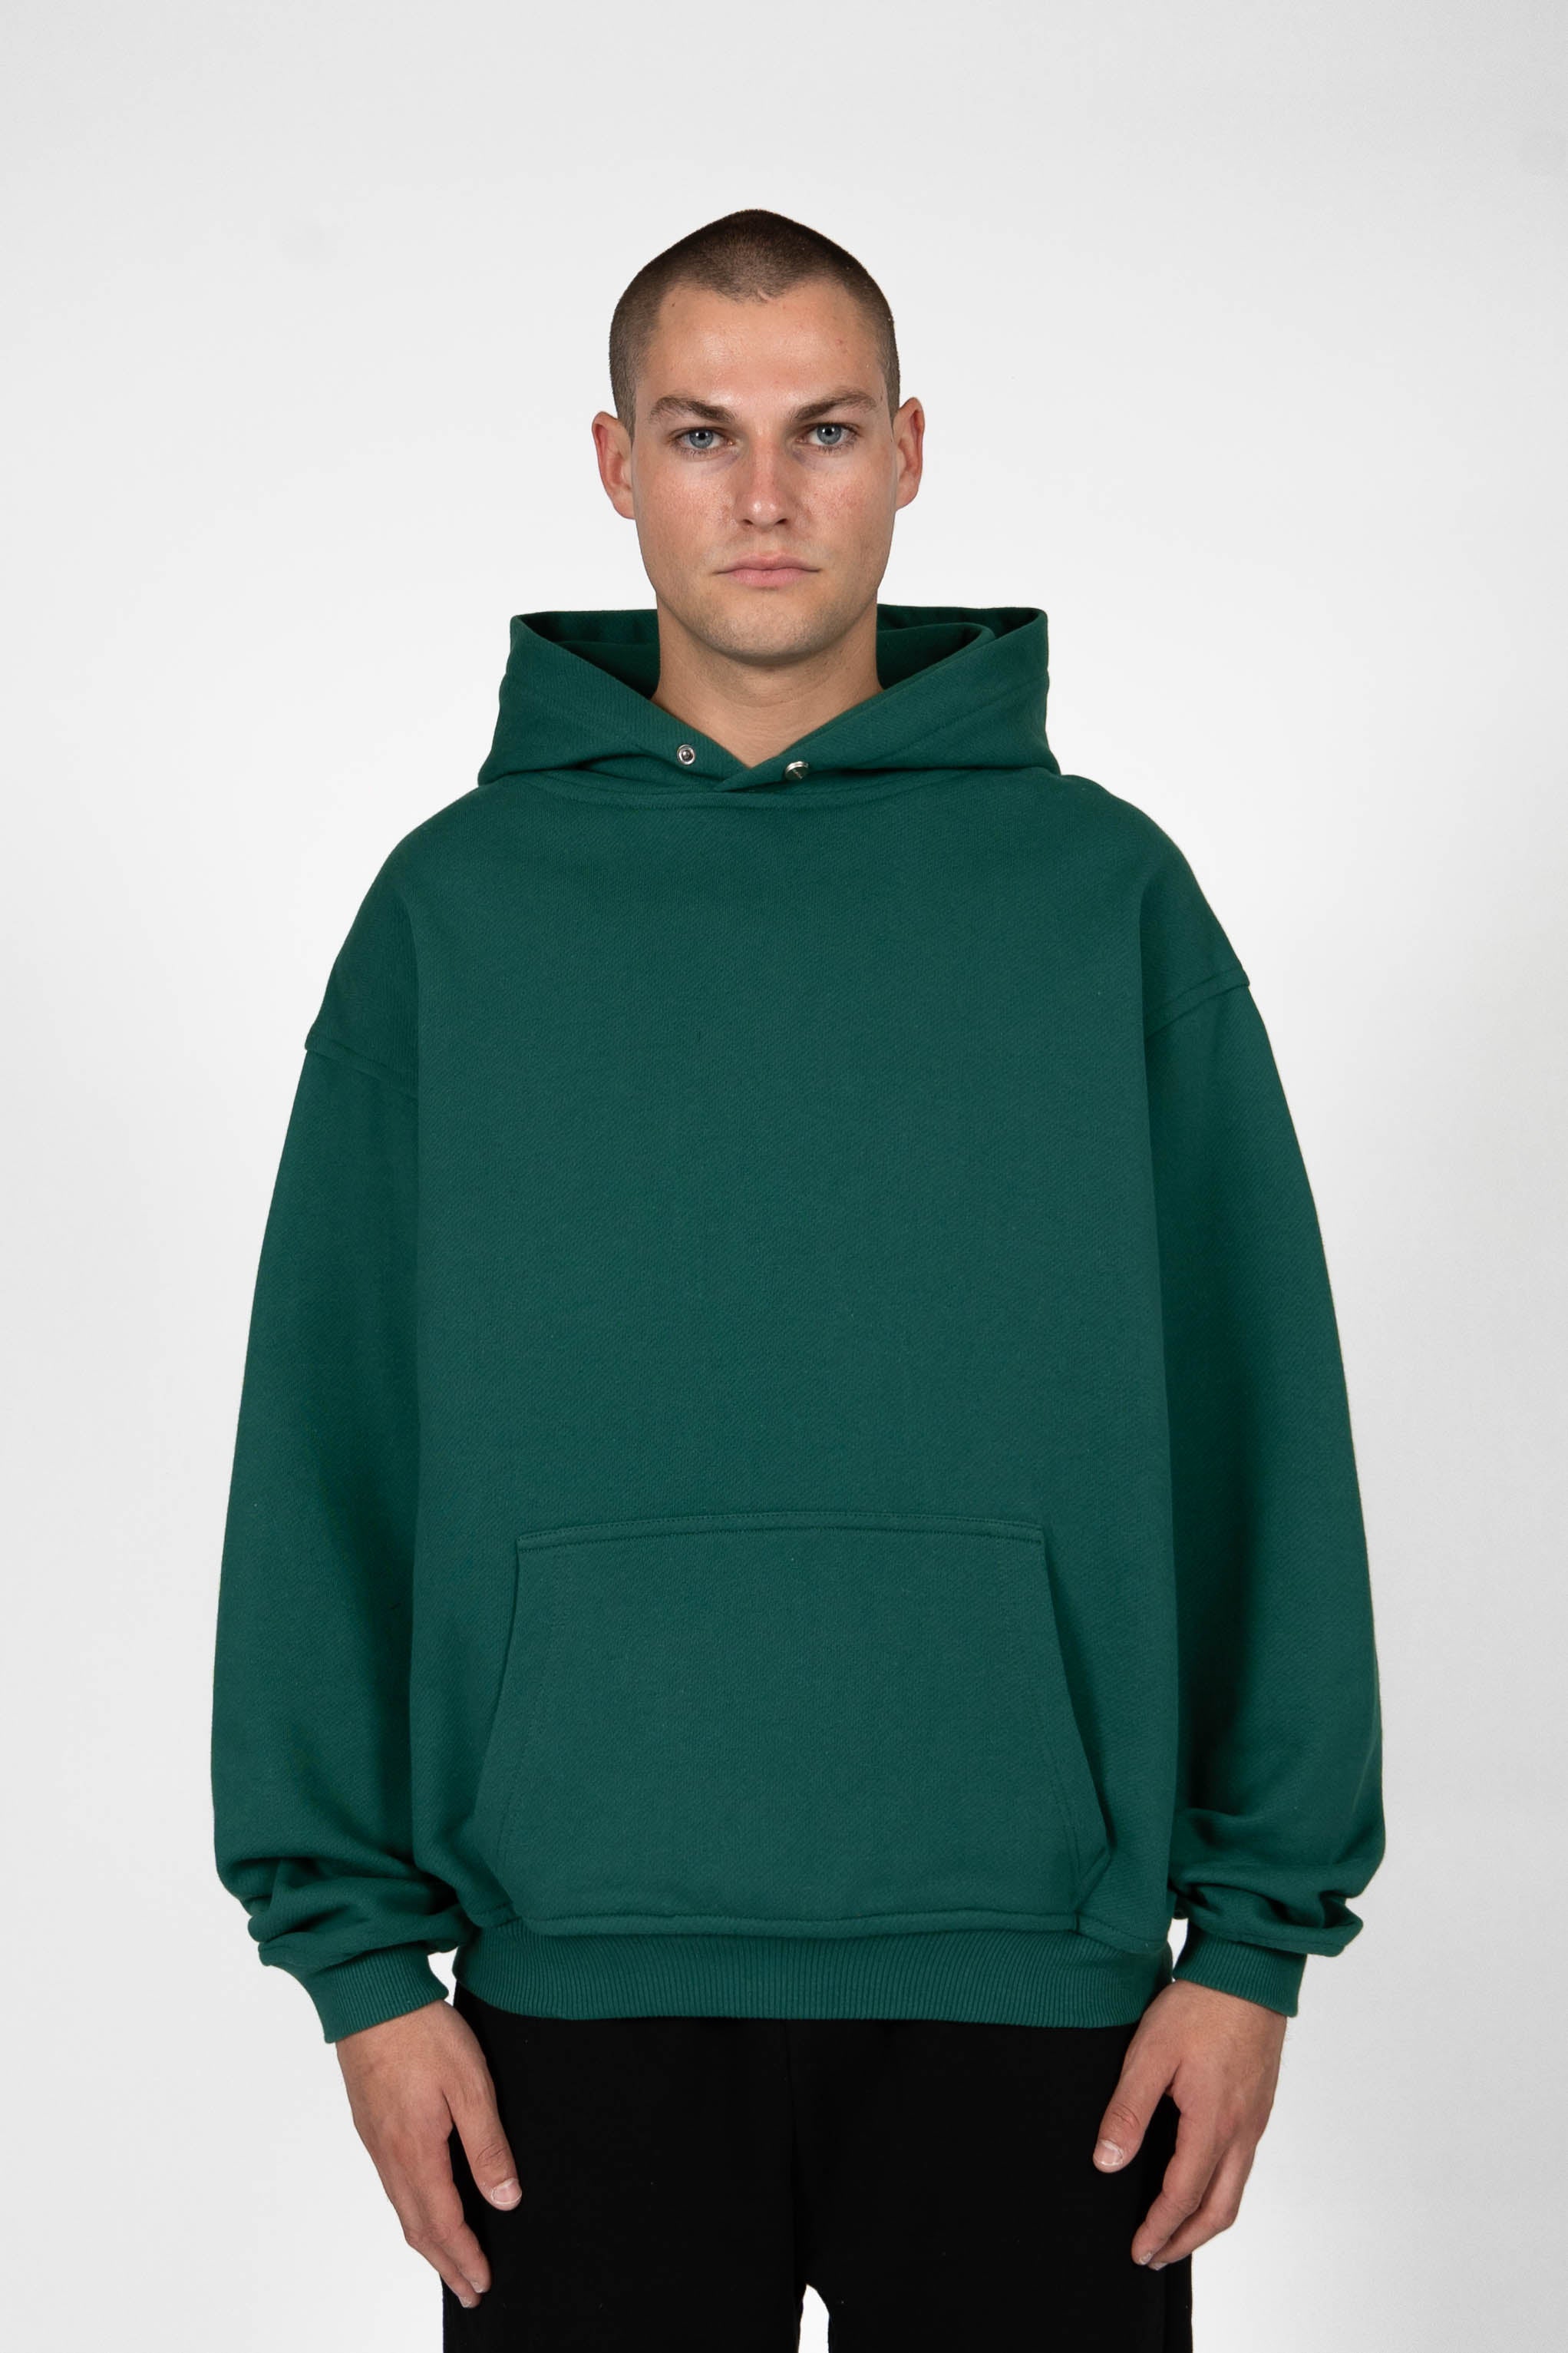 FOREST GREEN SNAP BUTTON HOODIE